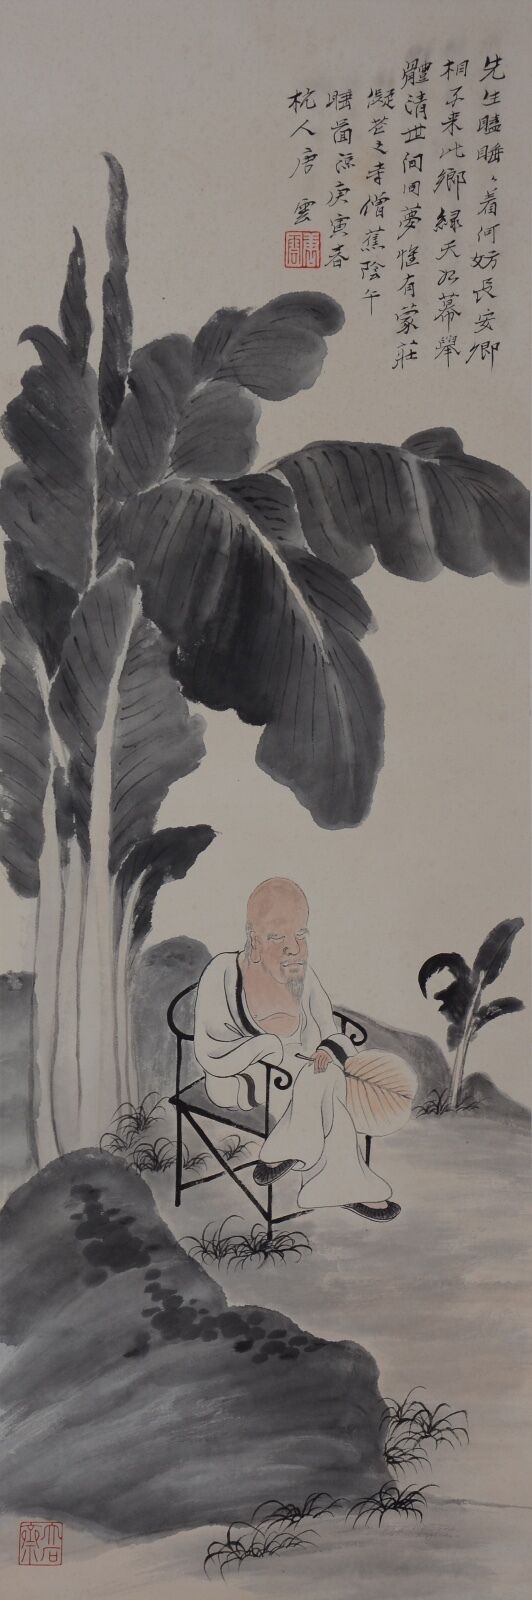 Excellent Chinese Scroll Painting  By Tangyun P274 唐云